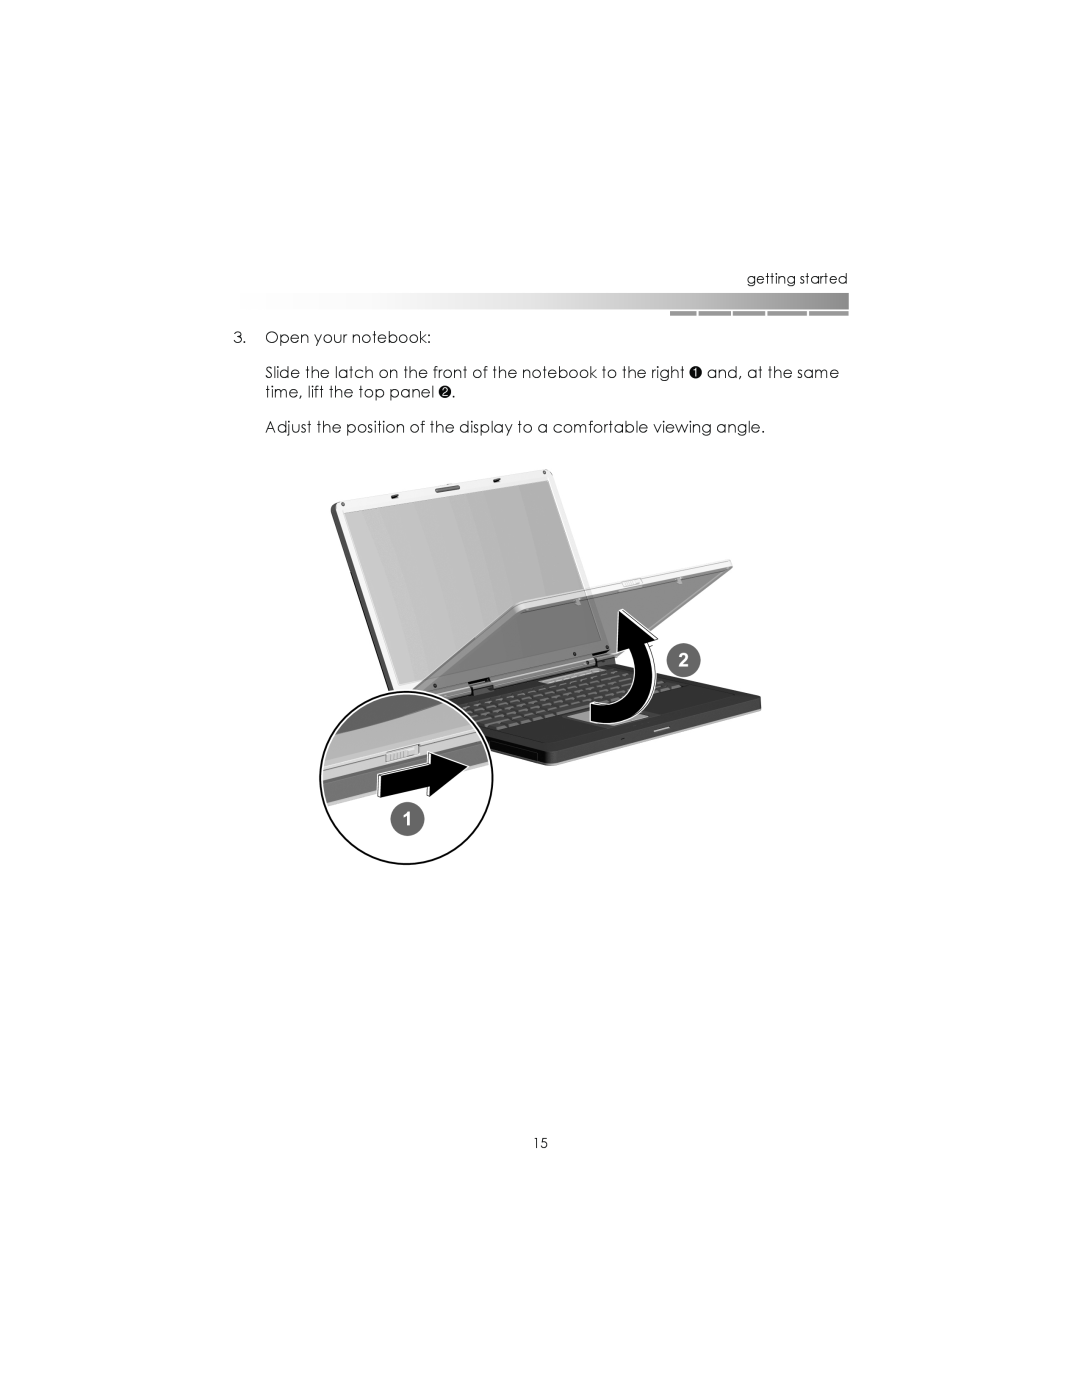 eMachines AAFW53700001K0 manual Open your notebook, Adjust the position of the display to a comfortable viewing angle 